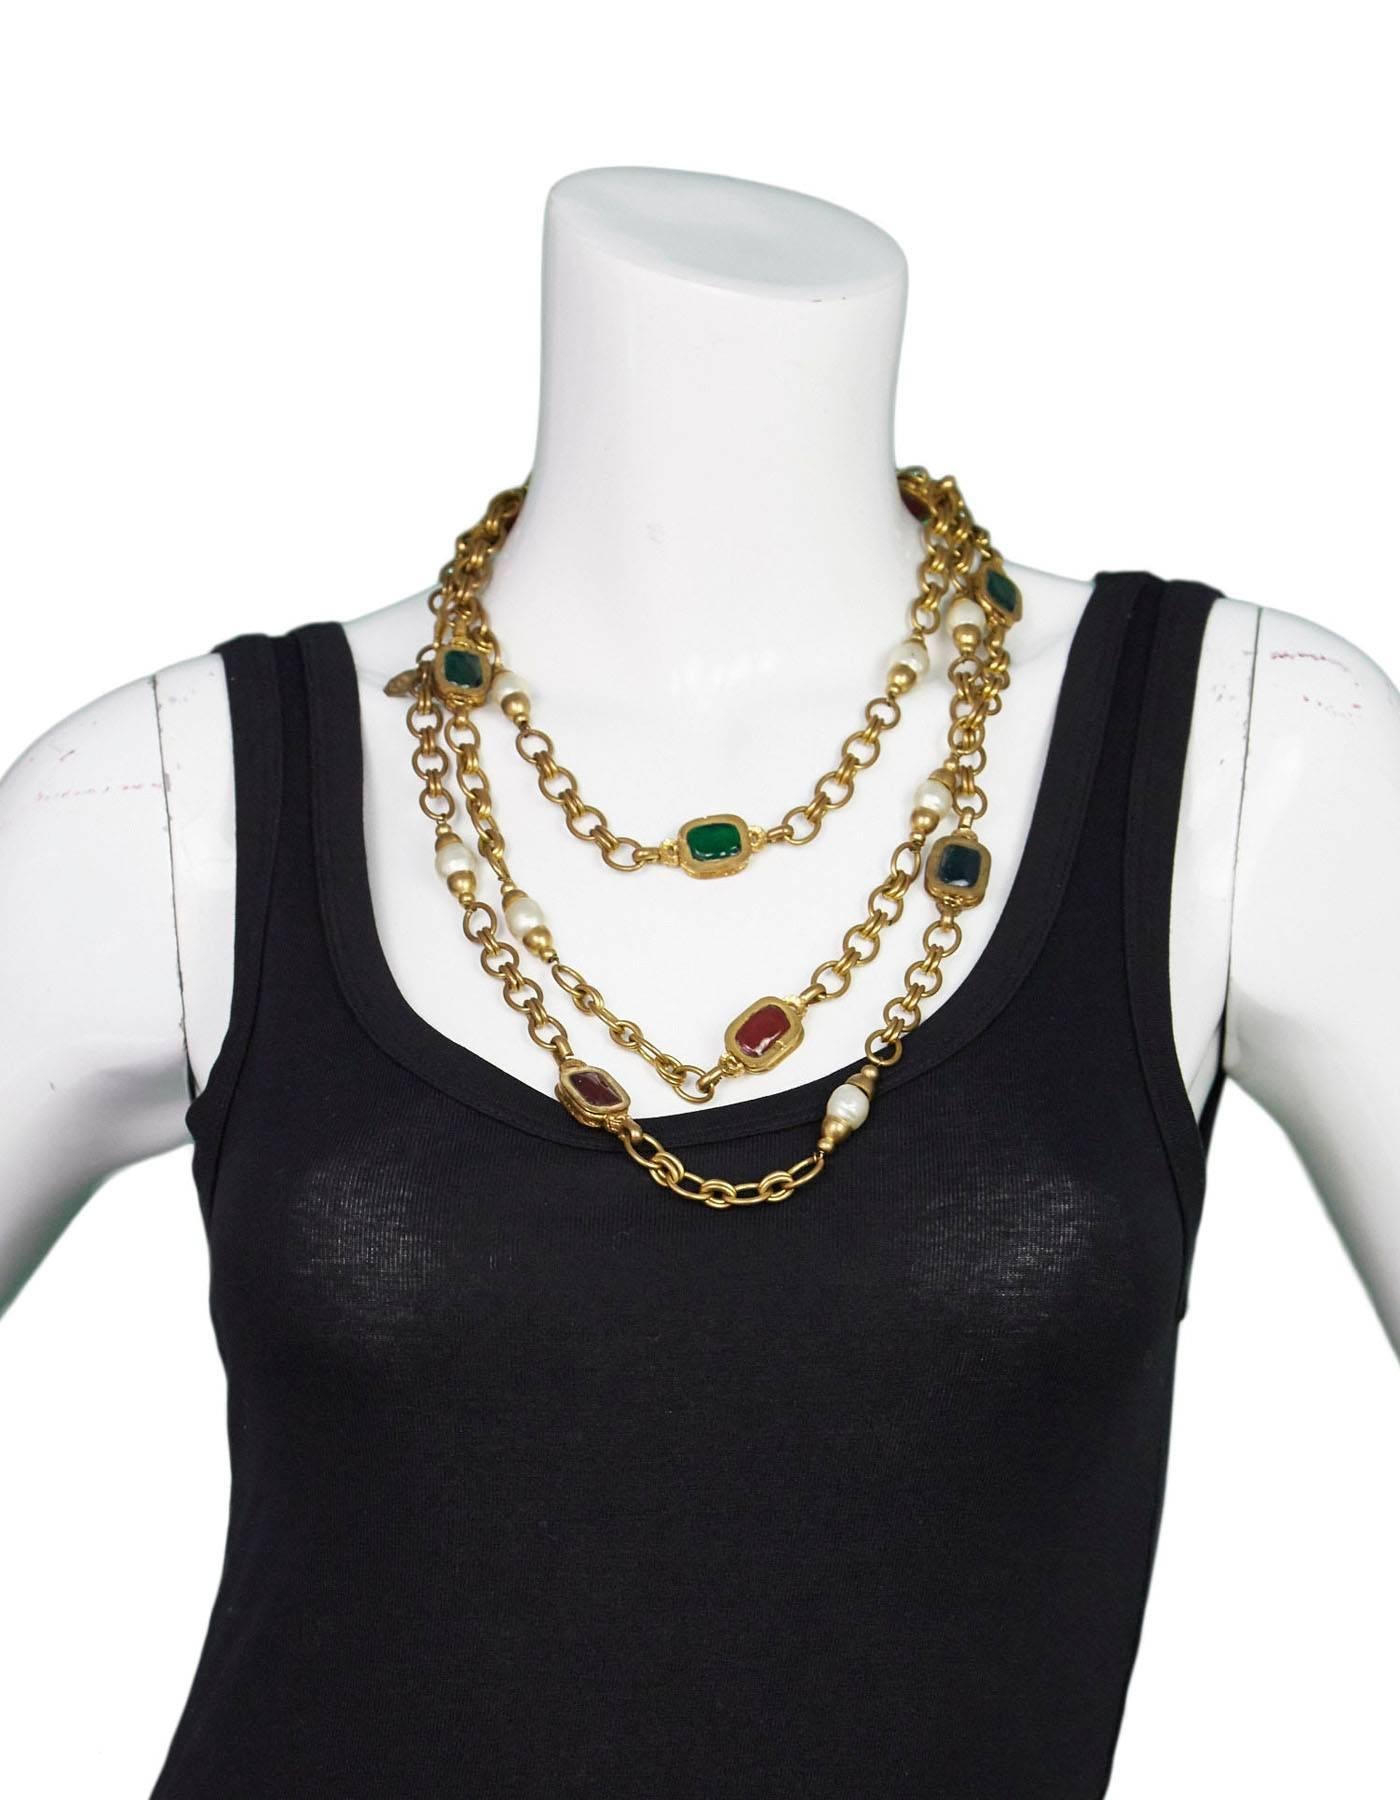 Chanel Chain Link & Gripoix Long Necklace 2